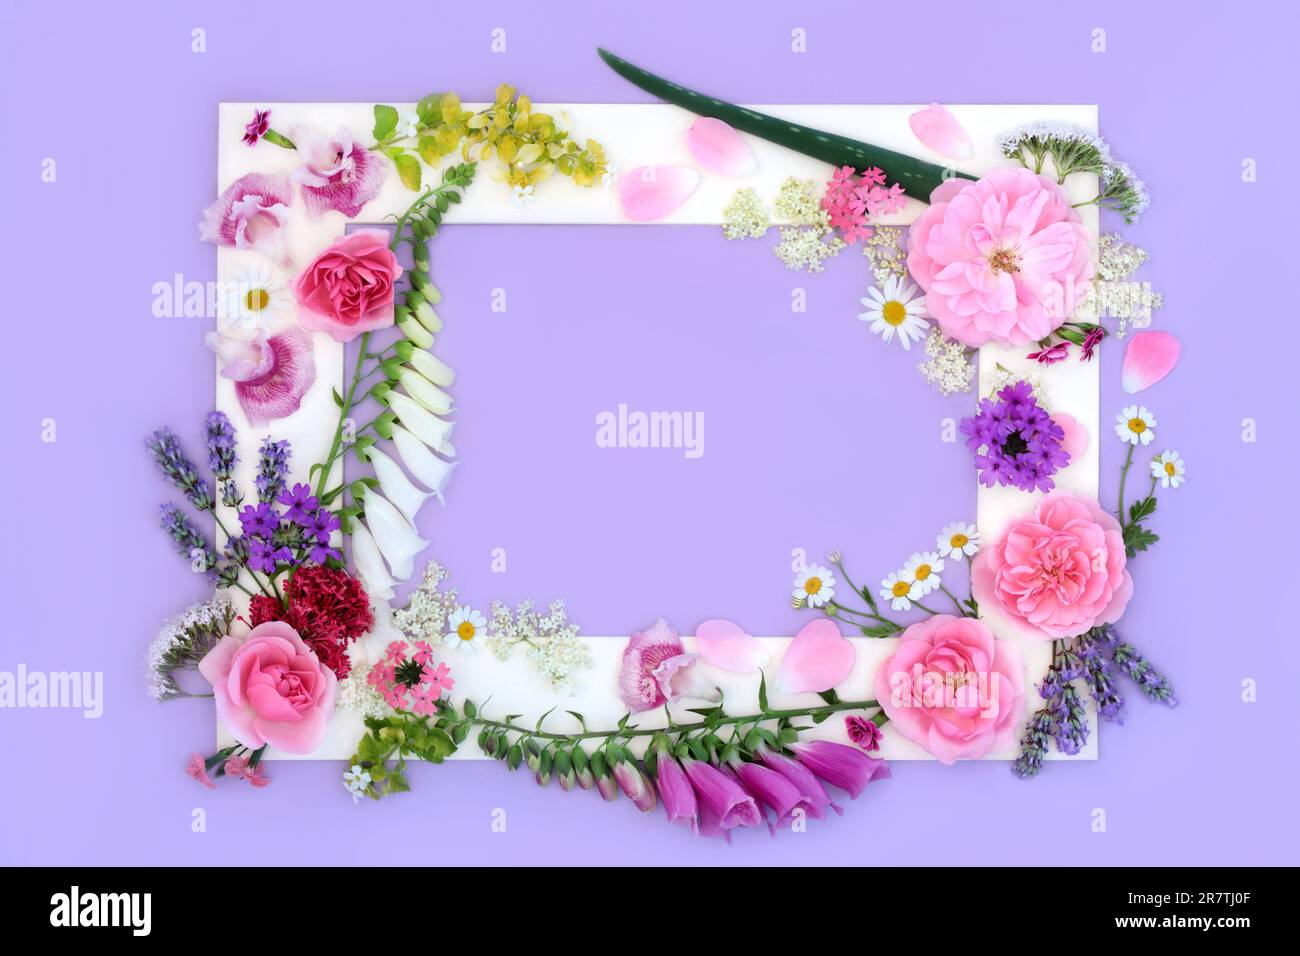 Medicinal summer flowers and wildflowers background frame with flora used in natural herbal medicine. Floral nature design with white border on purple Stock Photo